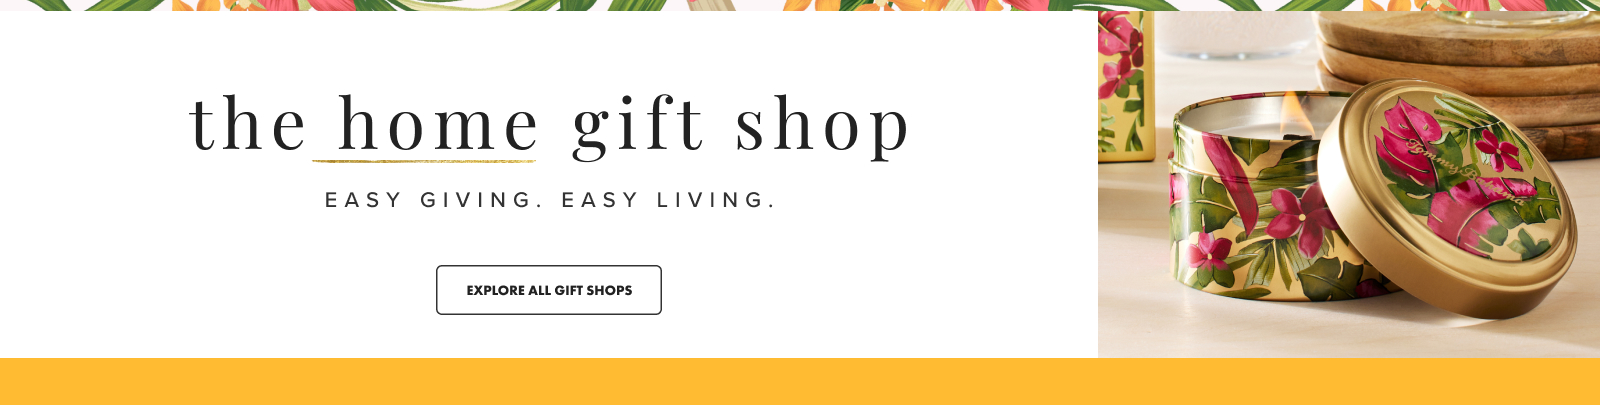 The Home Gift Shop: Easy Giving, Easy Living